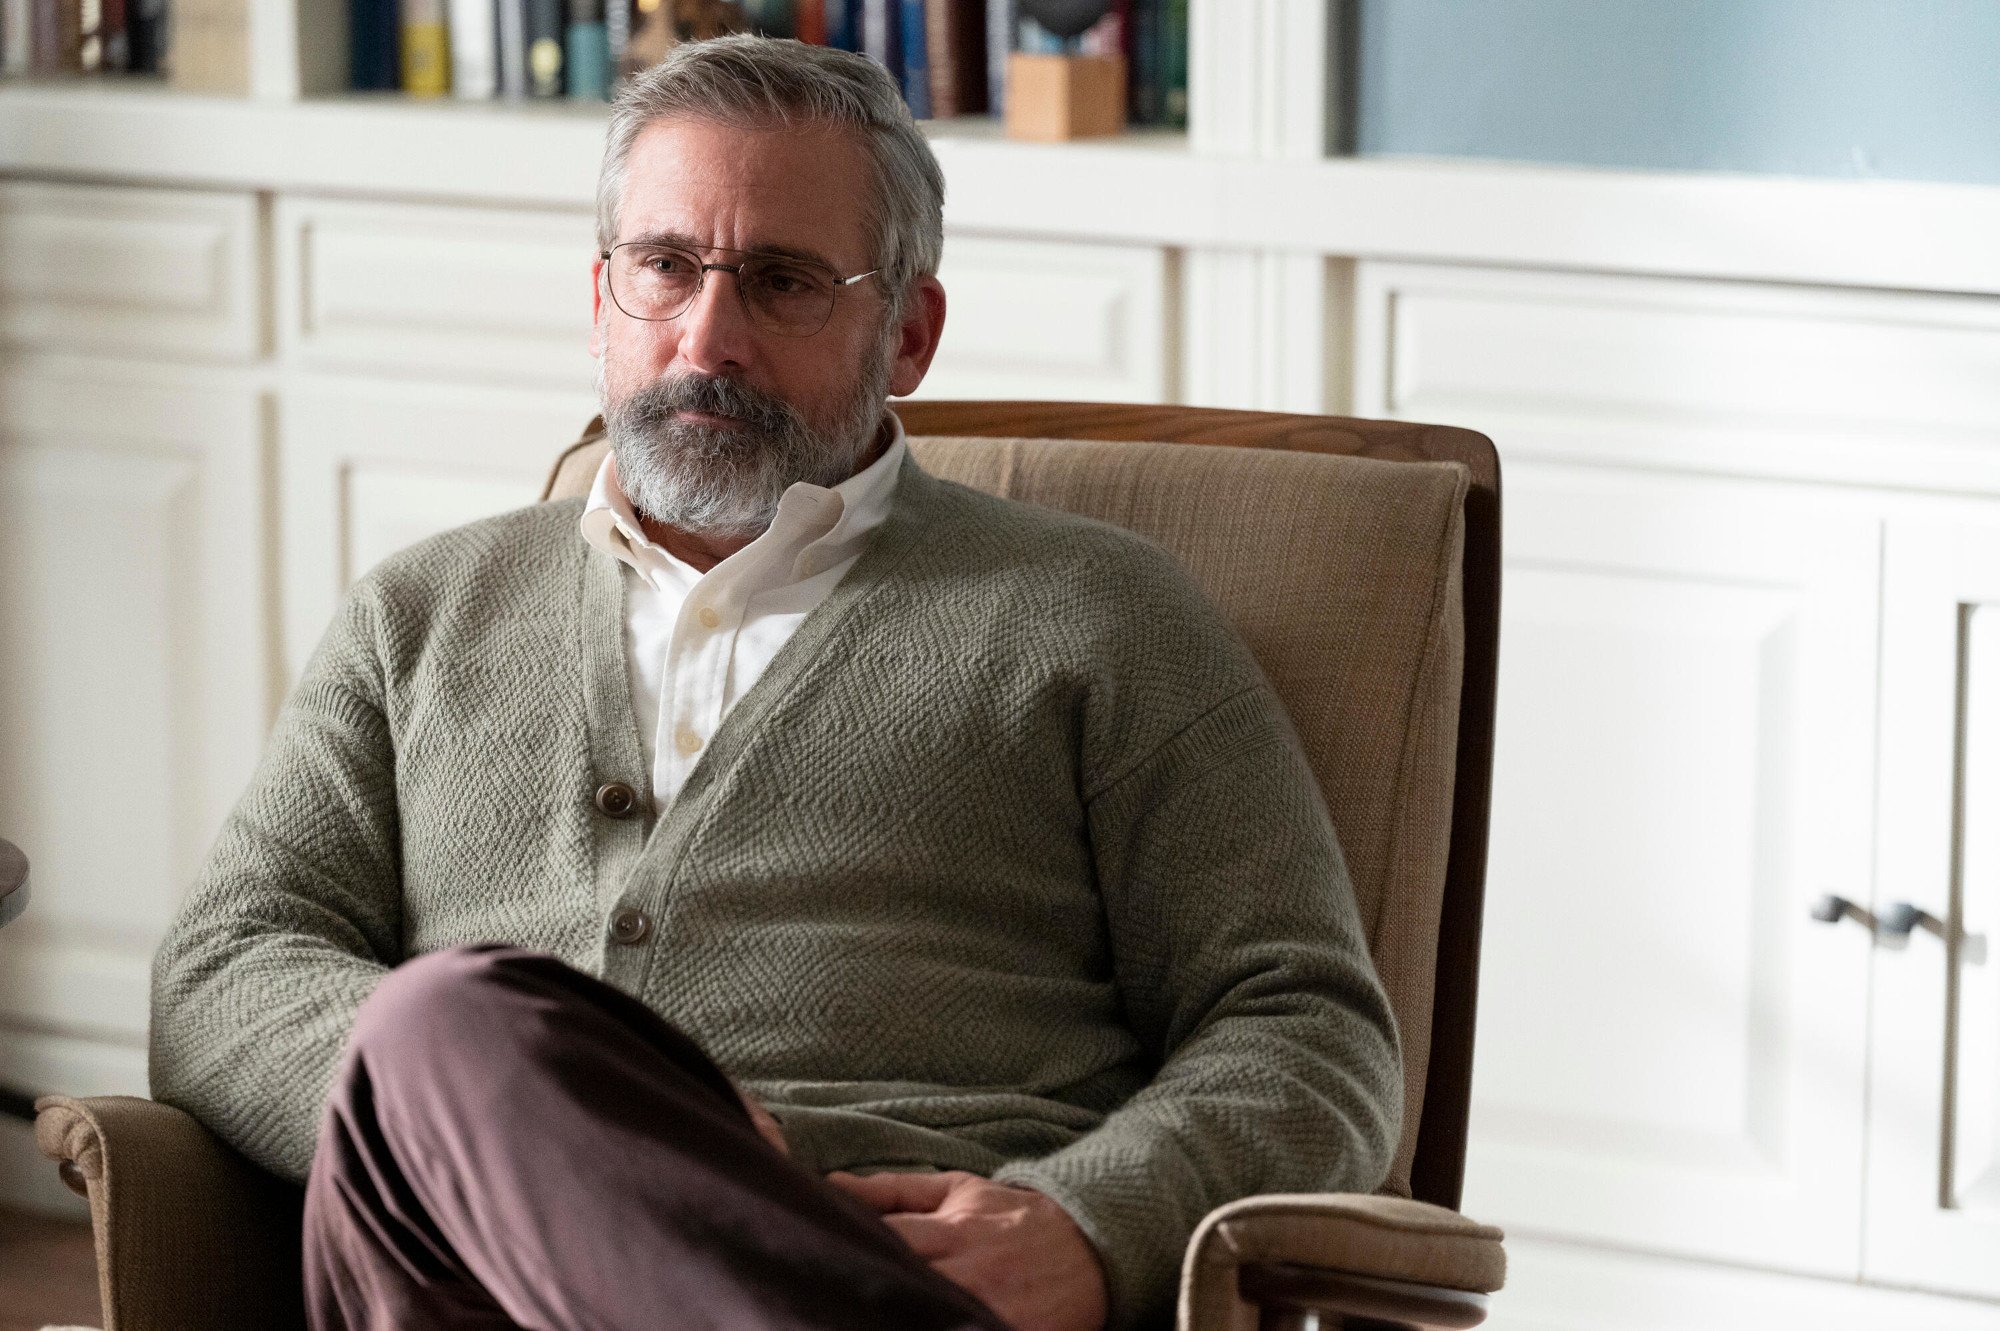 Steve Carell as Alan Strauss in Hulu's 'The Patient,' which has short runtimes. In the photo, he's wearing a white shirt and green cardigan and sitting in a chair. He's got gray hair, a gray beard, and glasses.